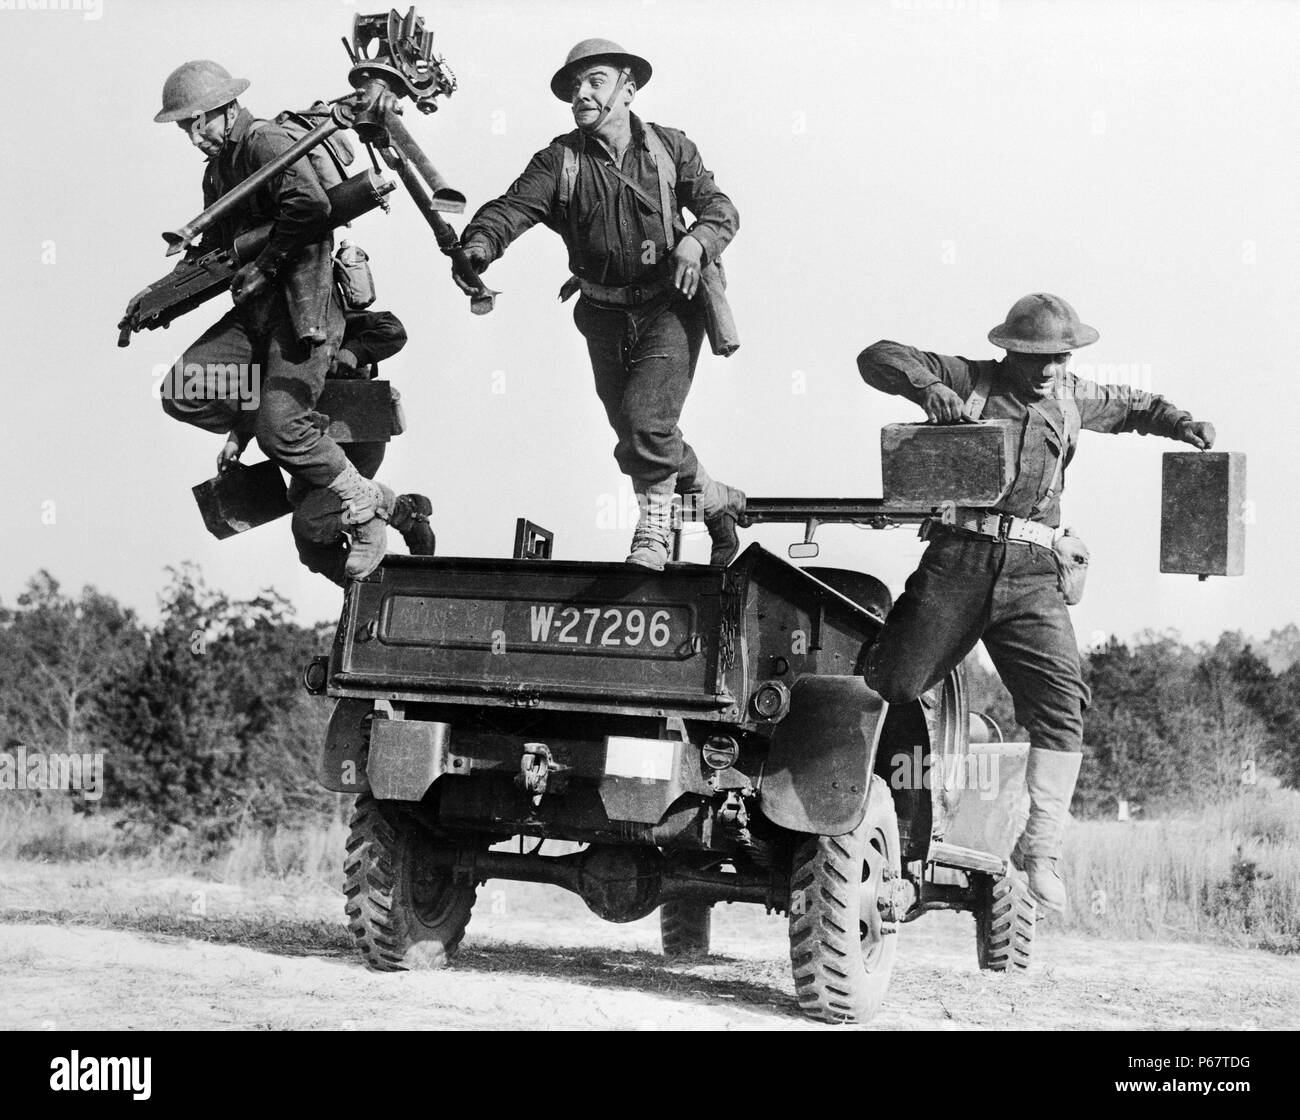 An American M1917 Browning machine gun squad in the middle of jumping off the back of a truck, c. 1941 Stock Photo